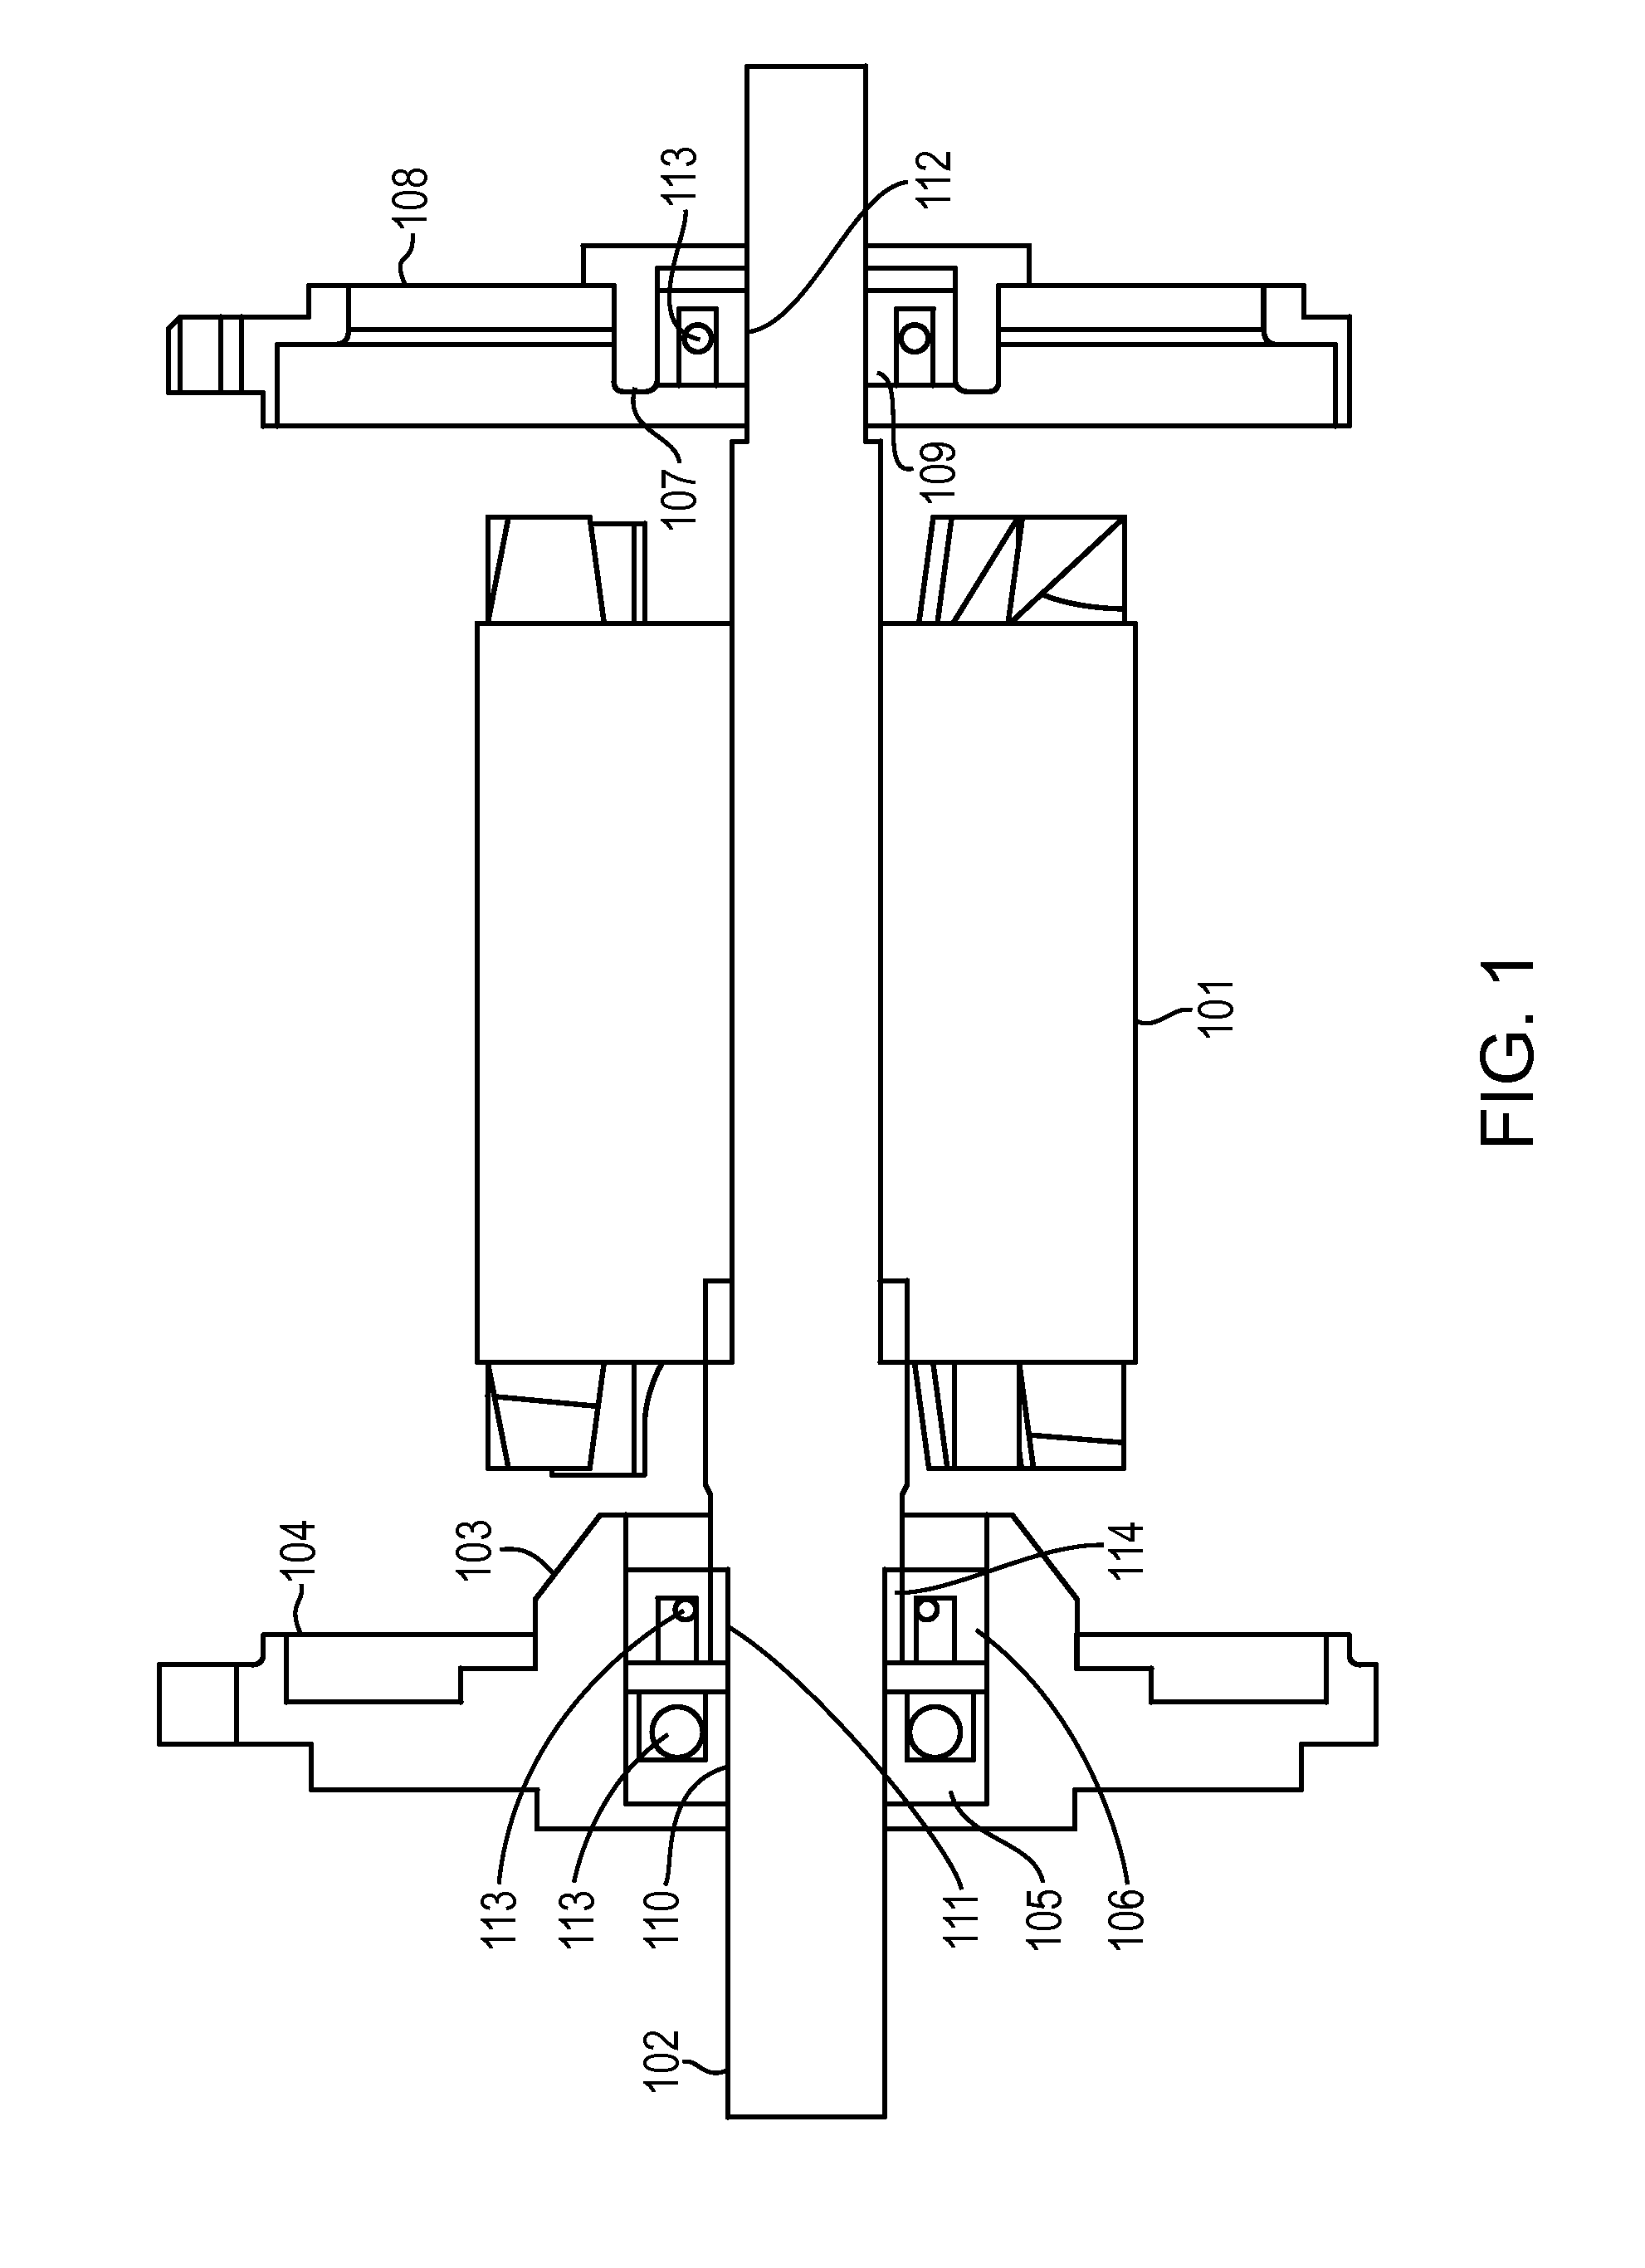 Bearing implementation for a rotating electrical device